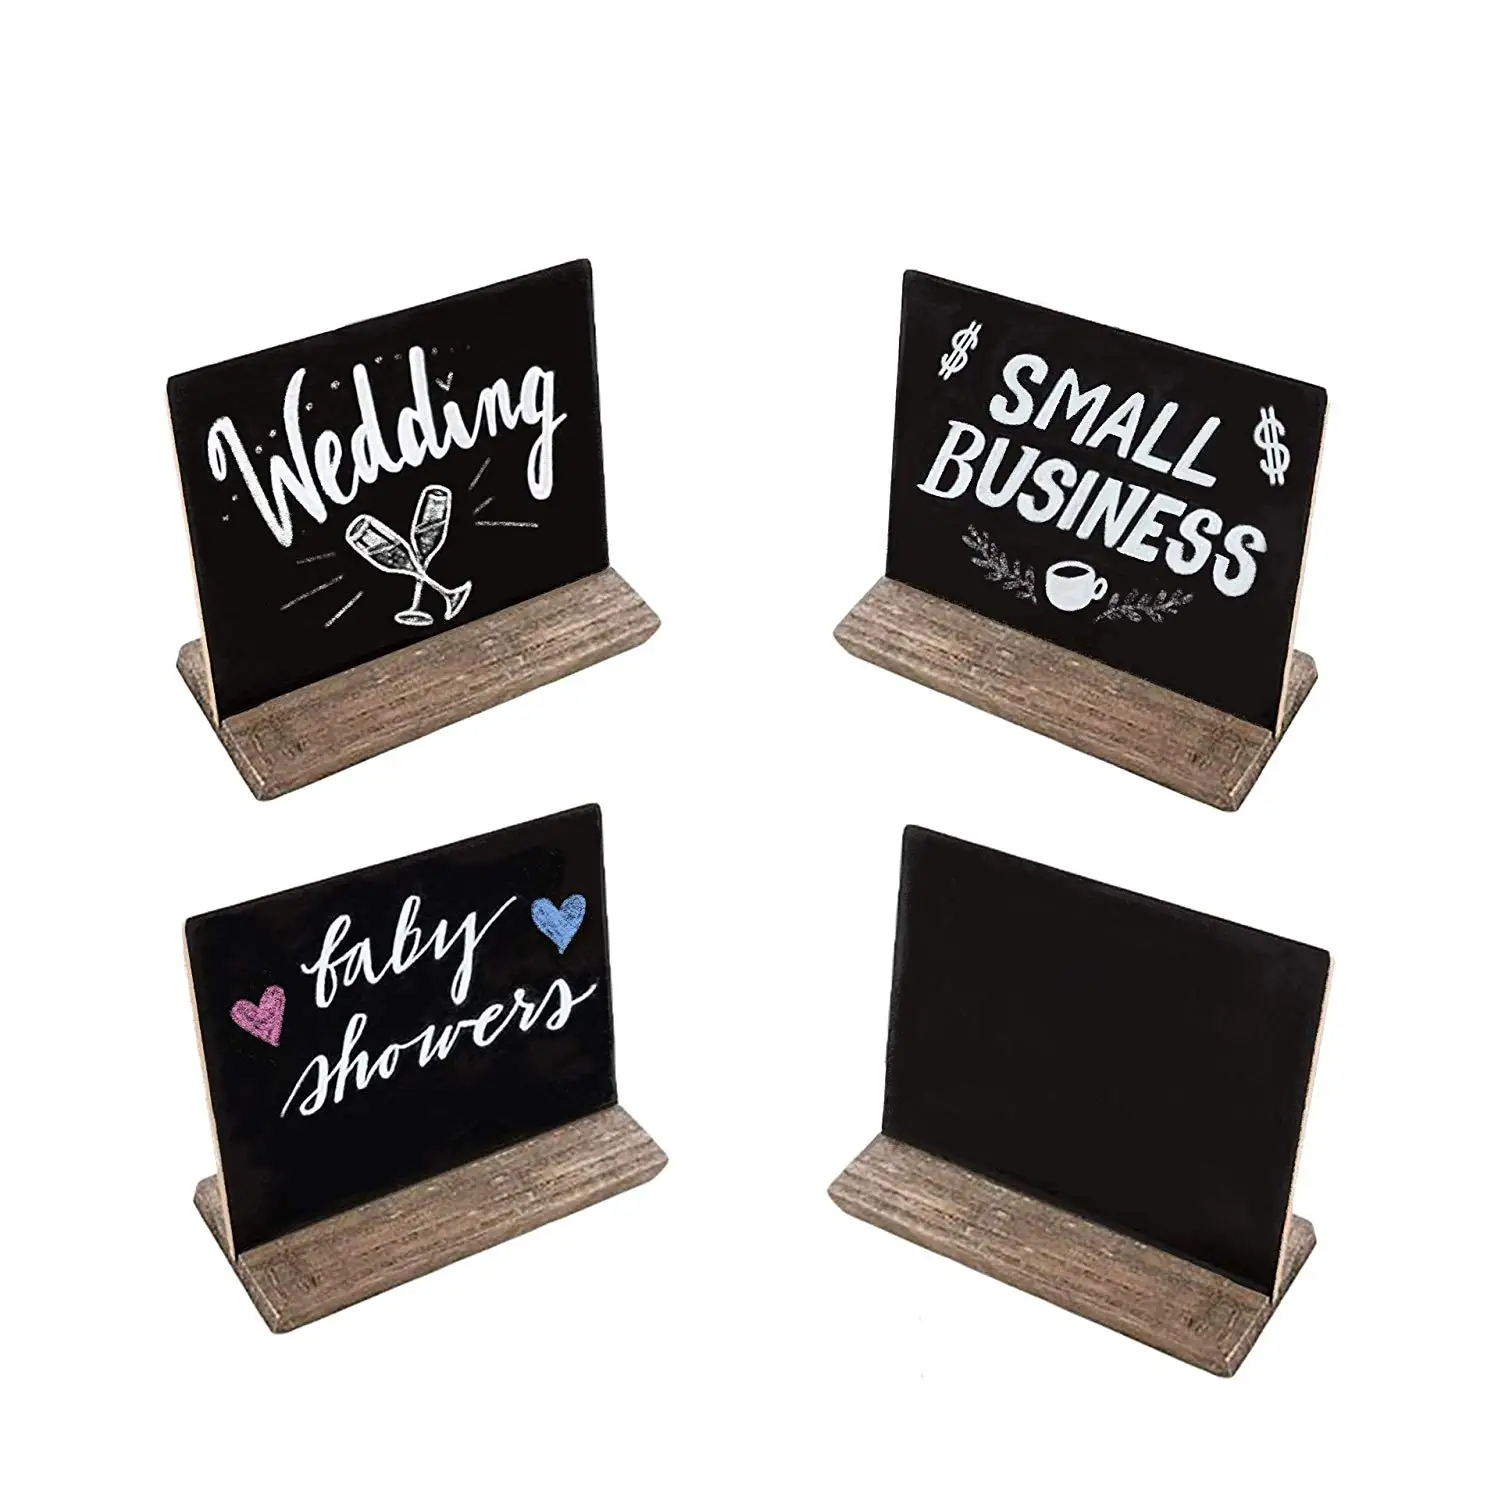 5 X 6 Inch Mini Tabletop Chalkboard Signs with Vintage Rustic Style Wood Base 